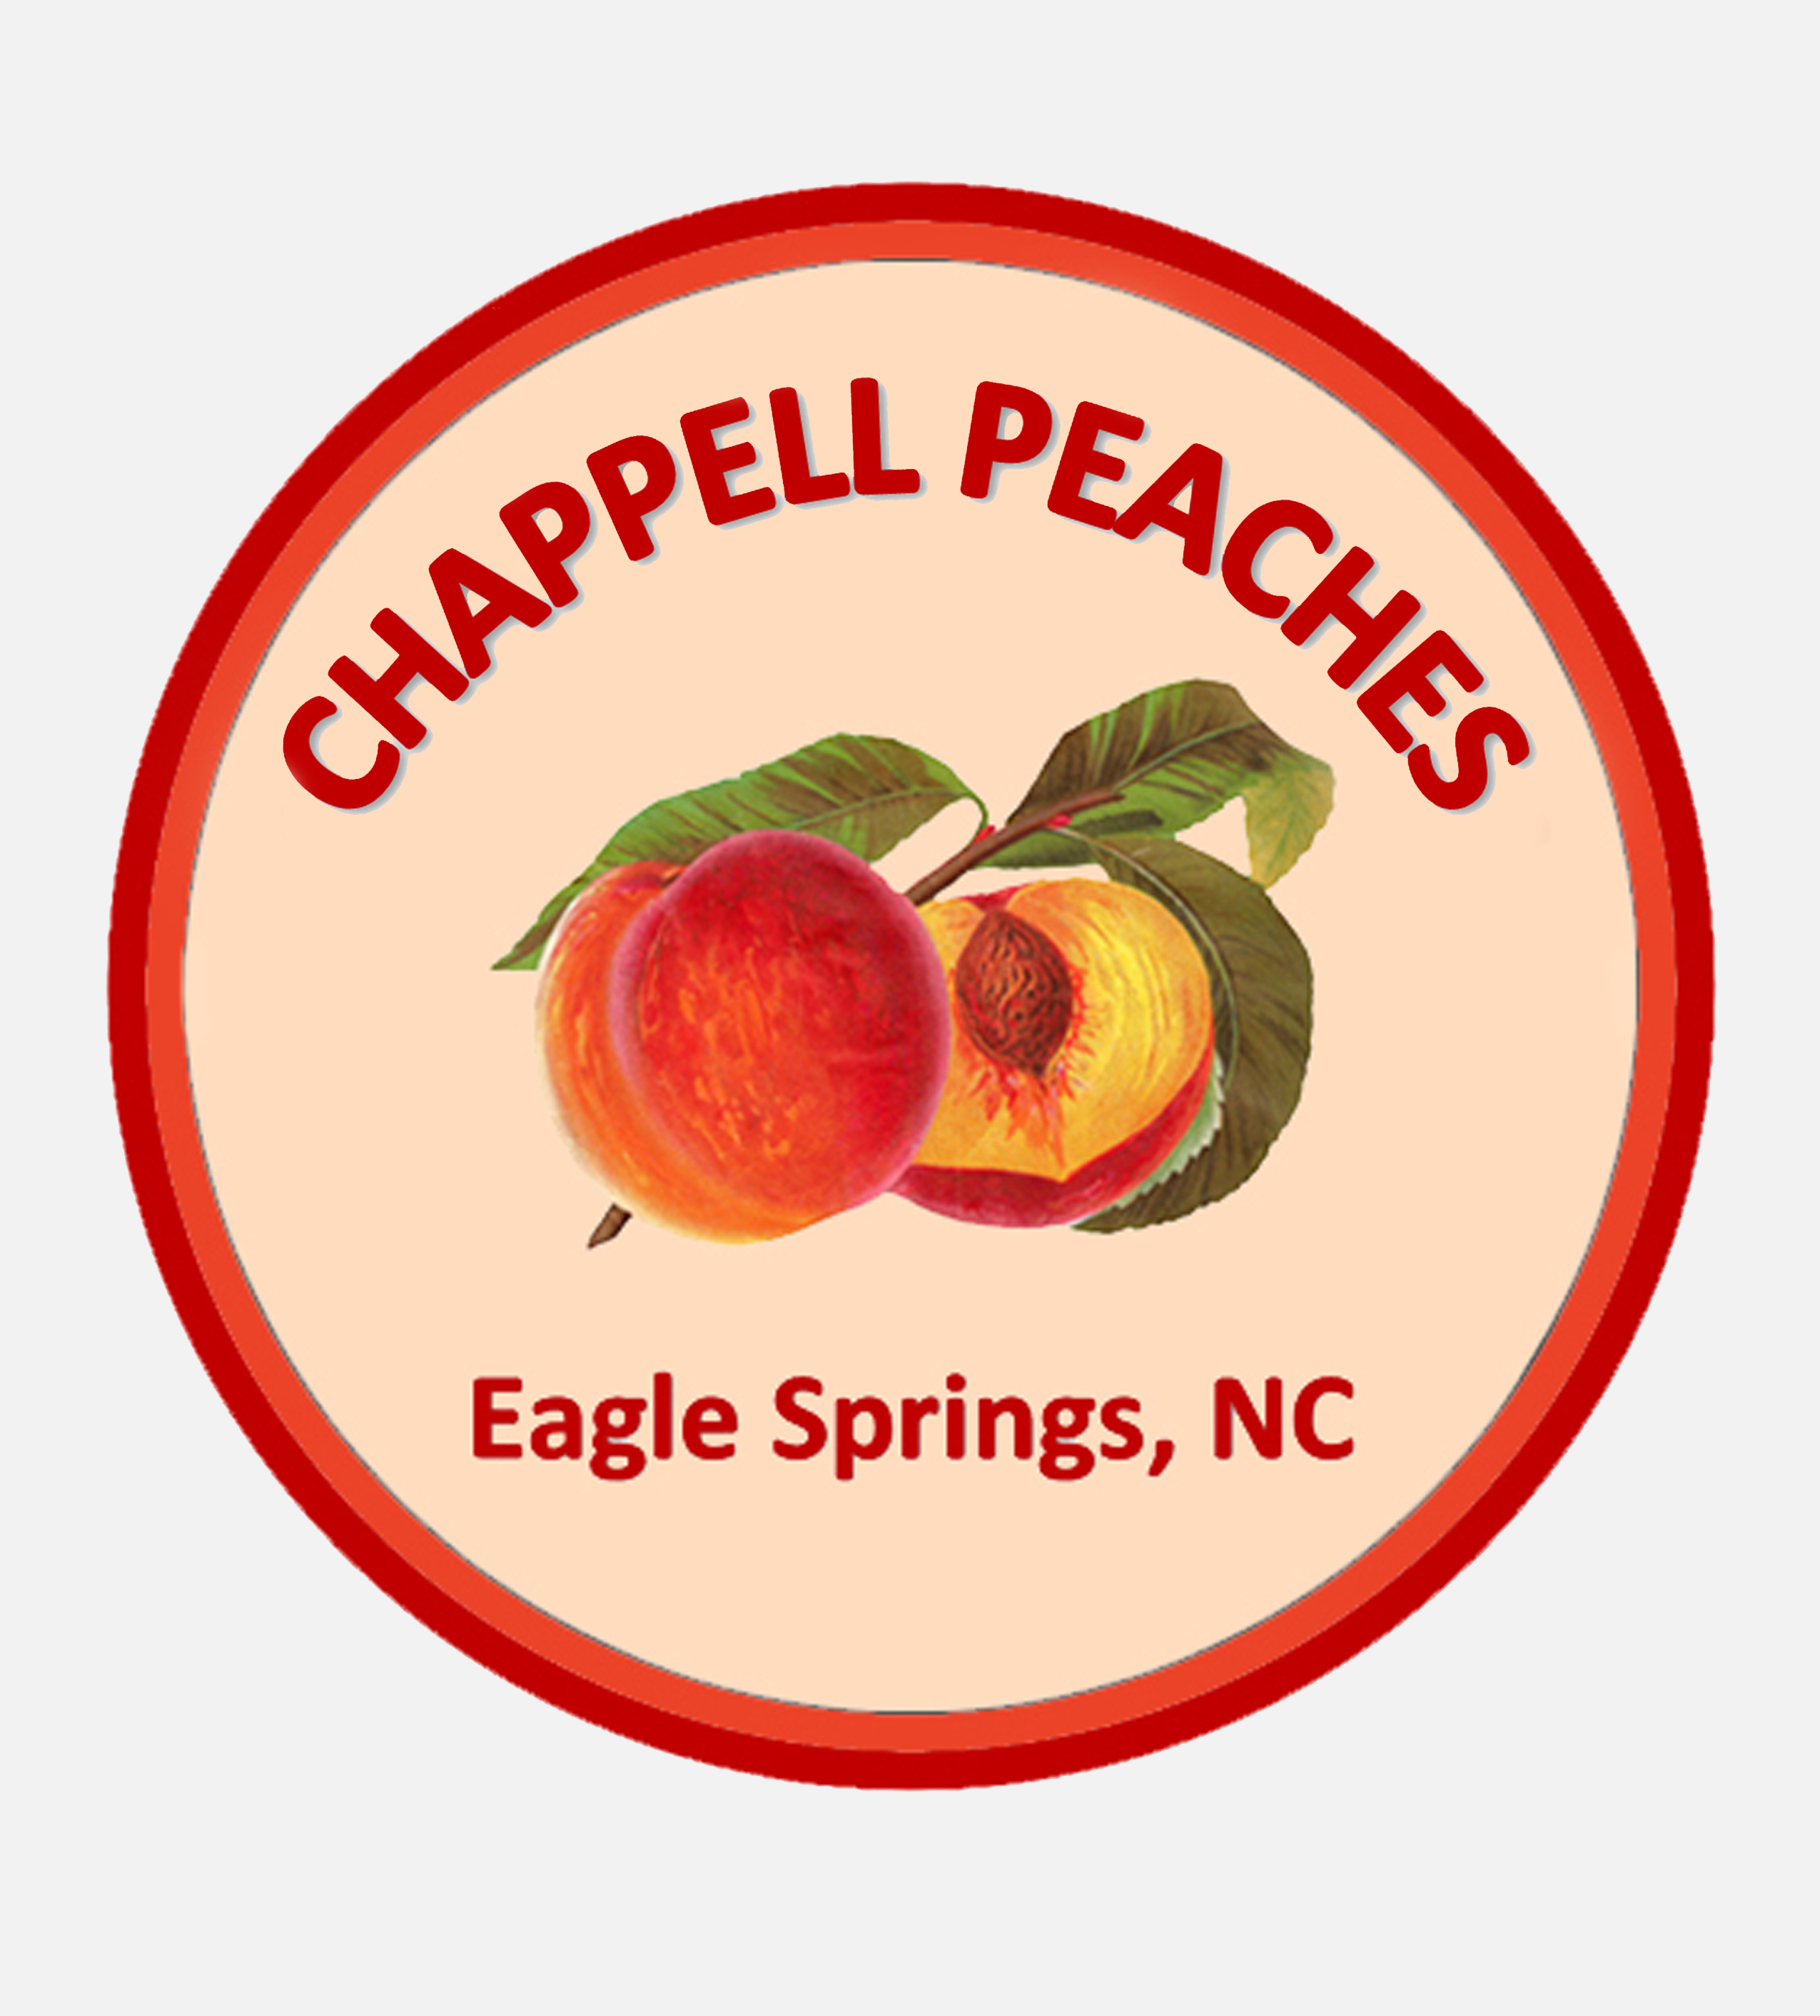 Ken Chappell's Peaches and Apples